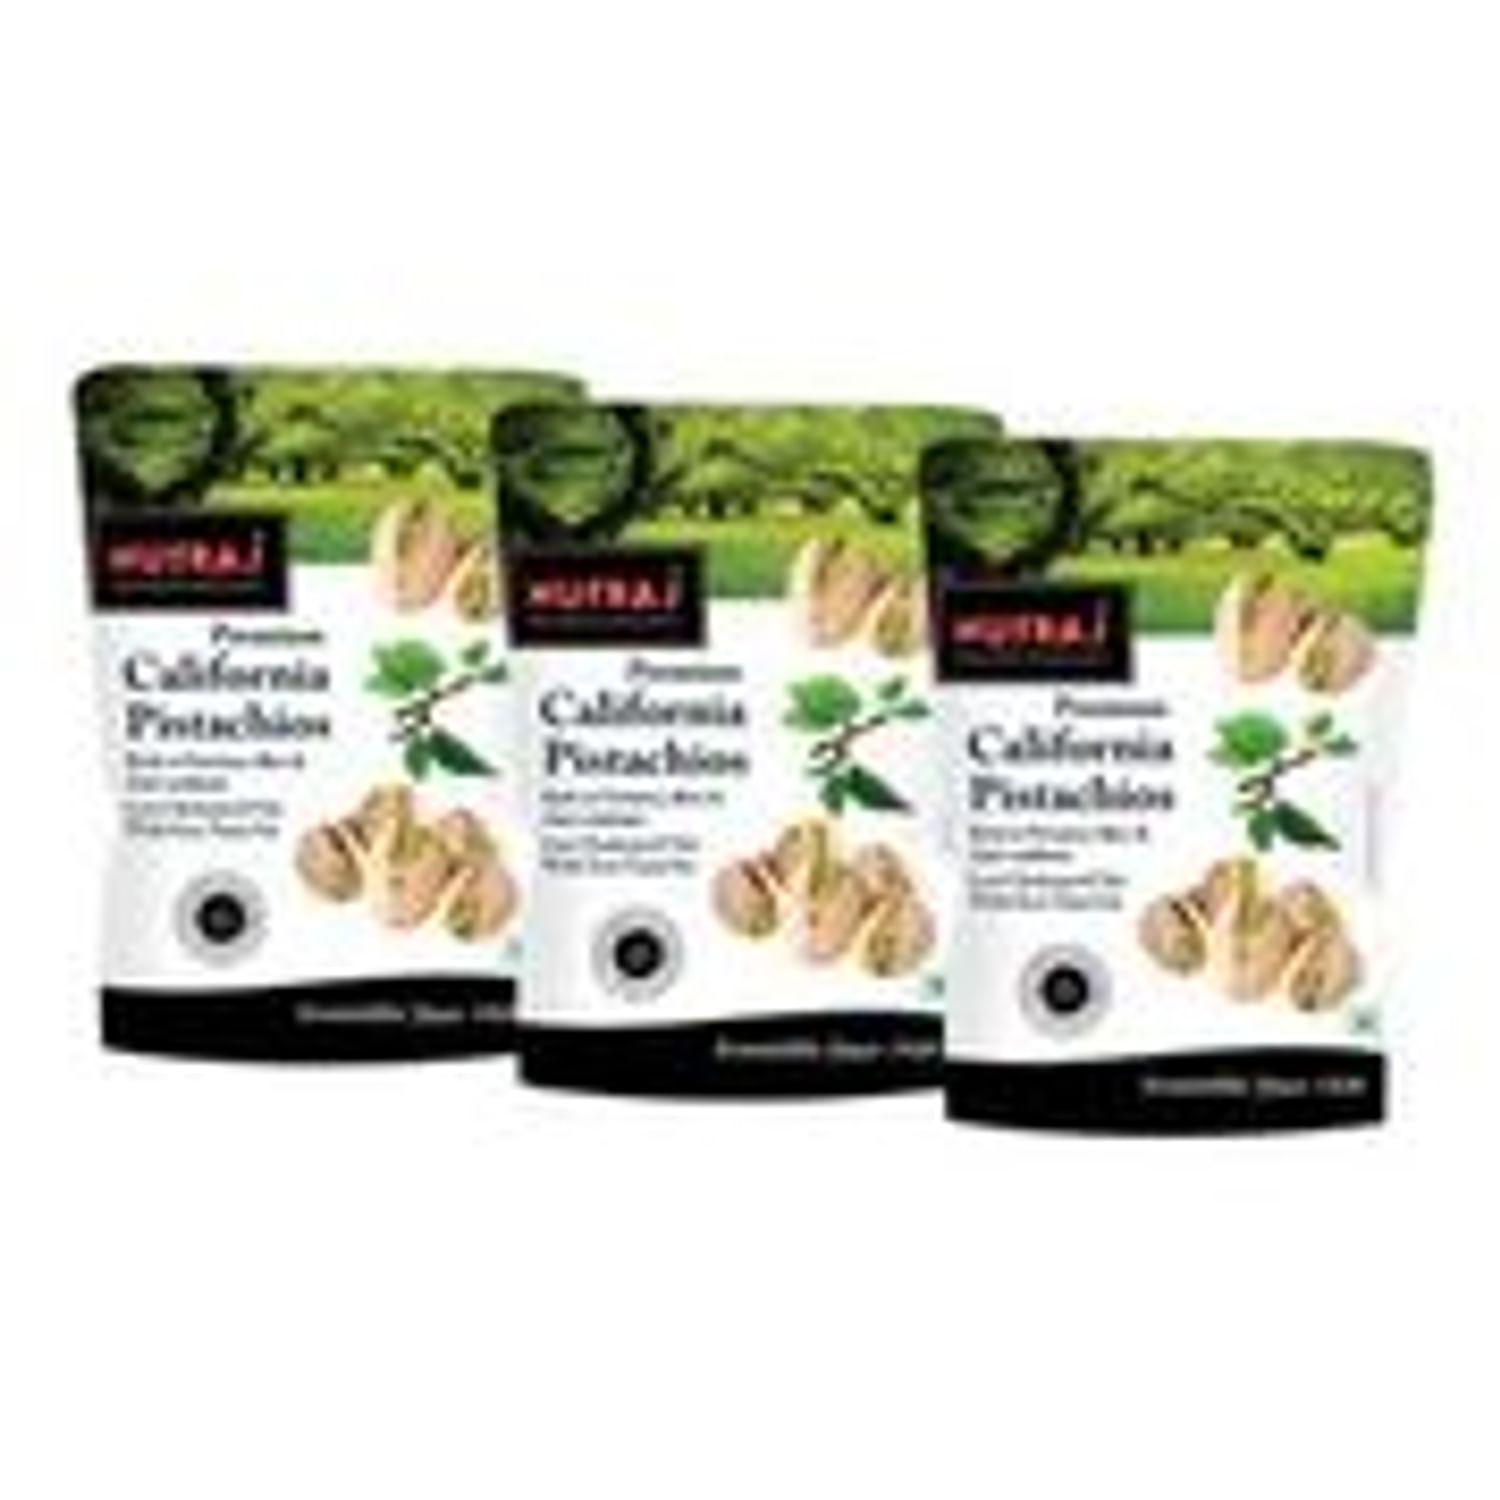 Nutraj California Roasted and Salted Pistachios 750g (3 X 250g)